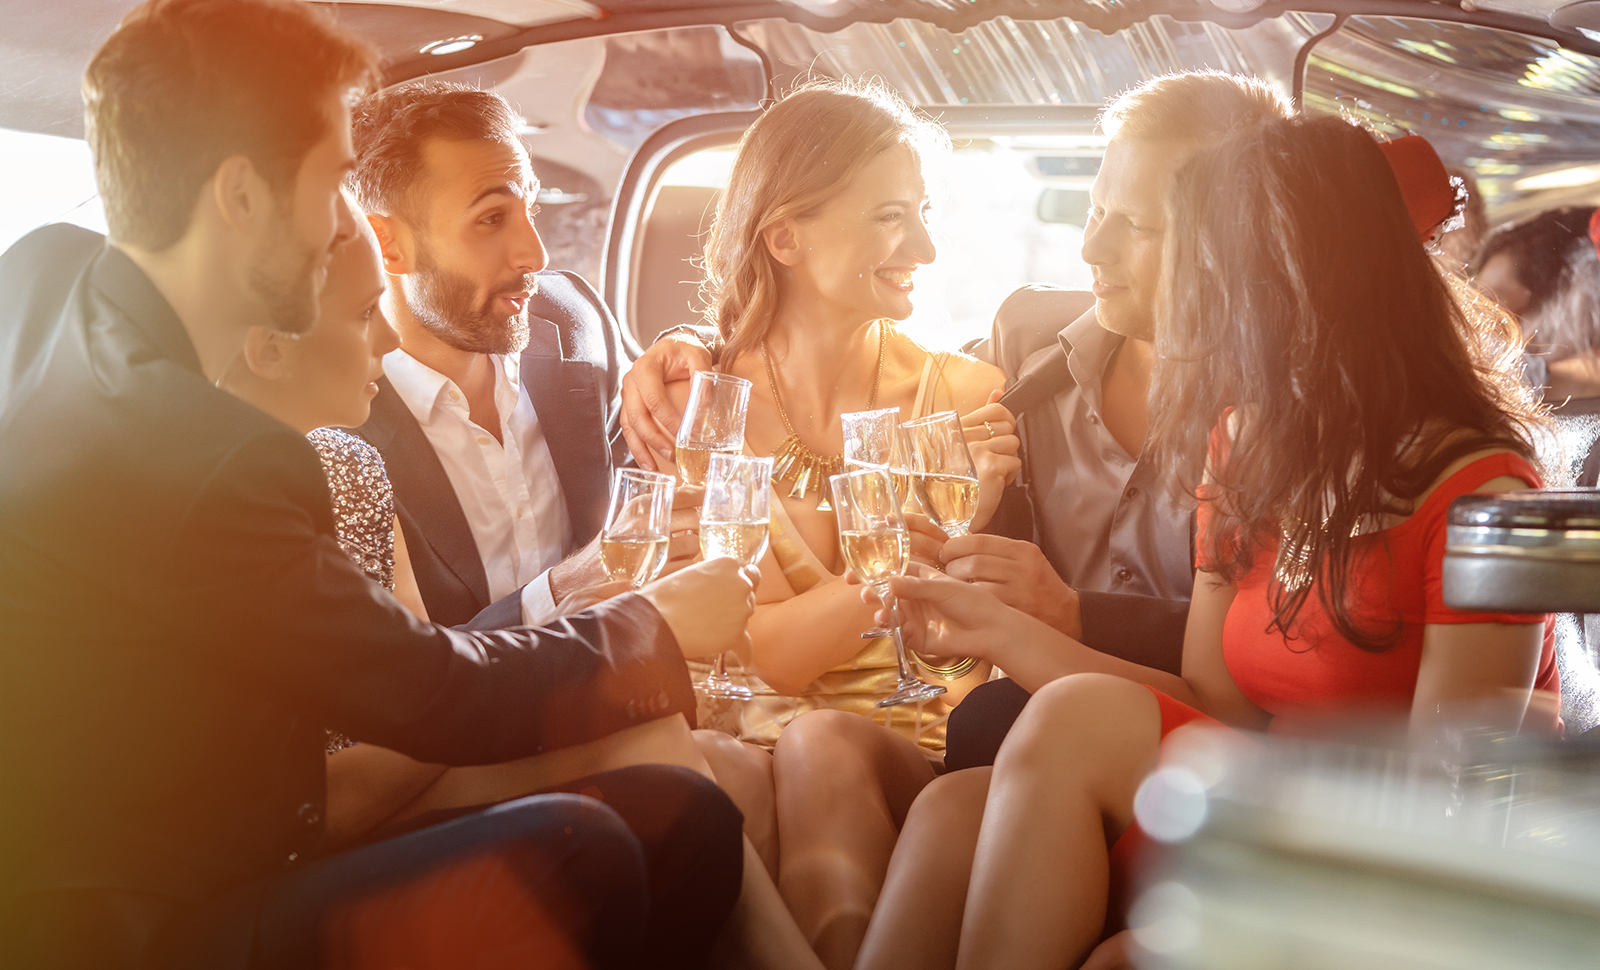 Should You Consider A Combined Bachelor & Bachelorette Party?